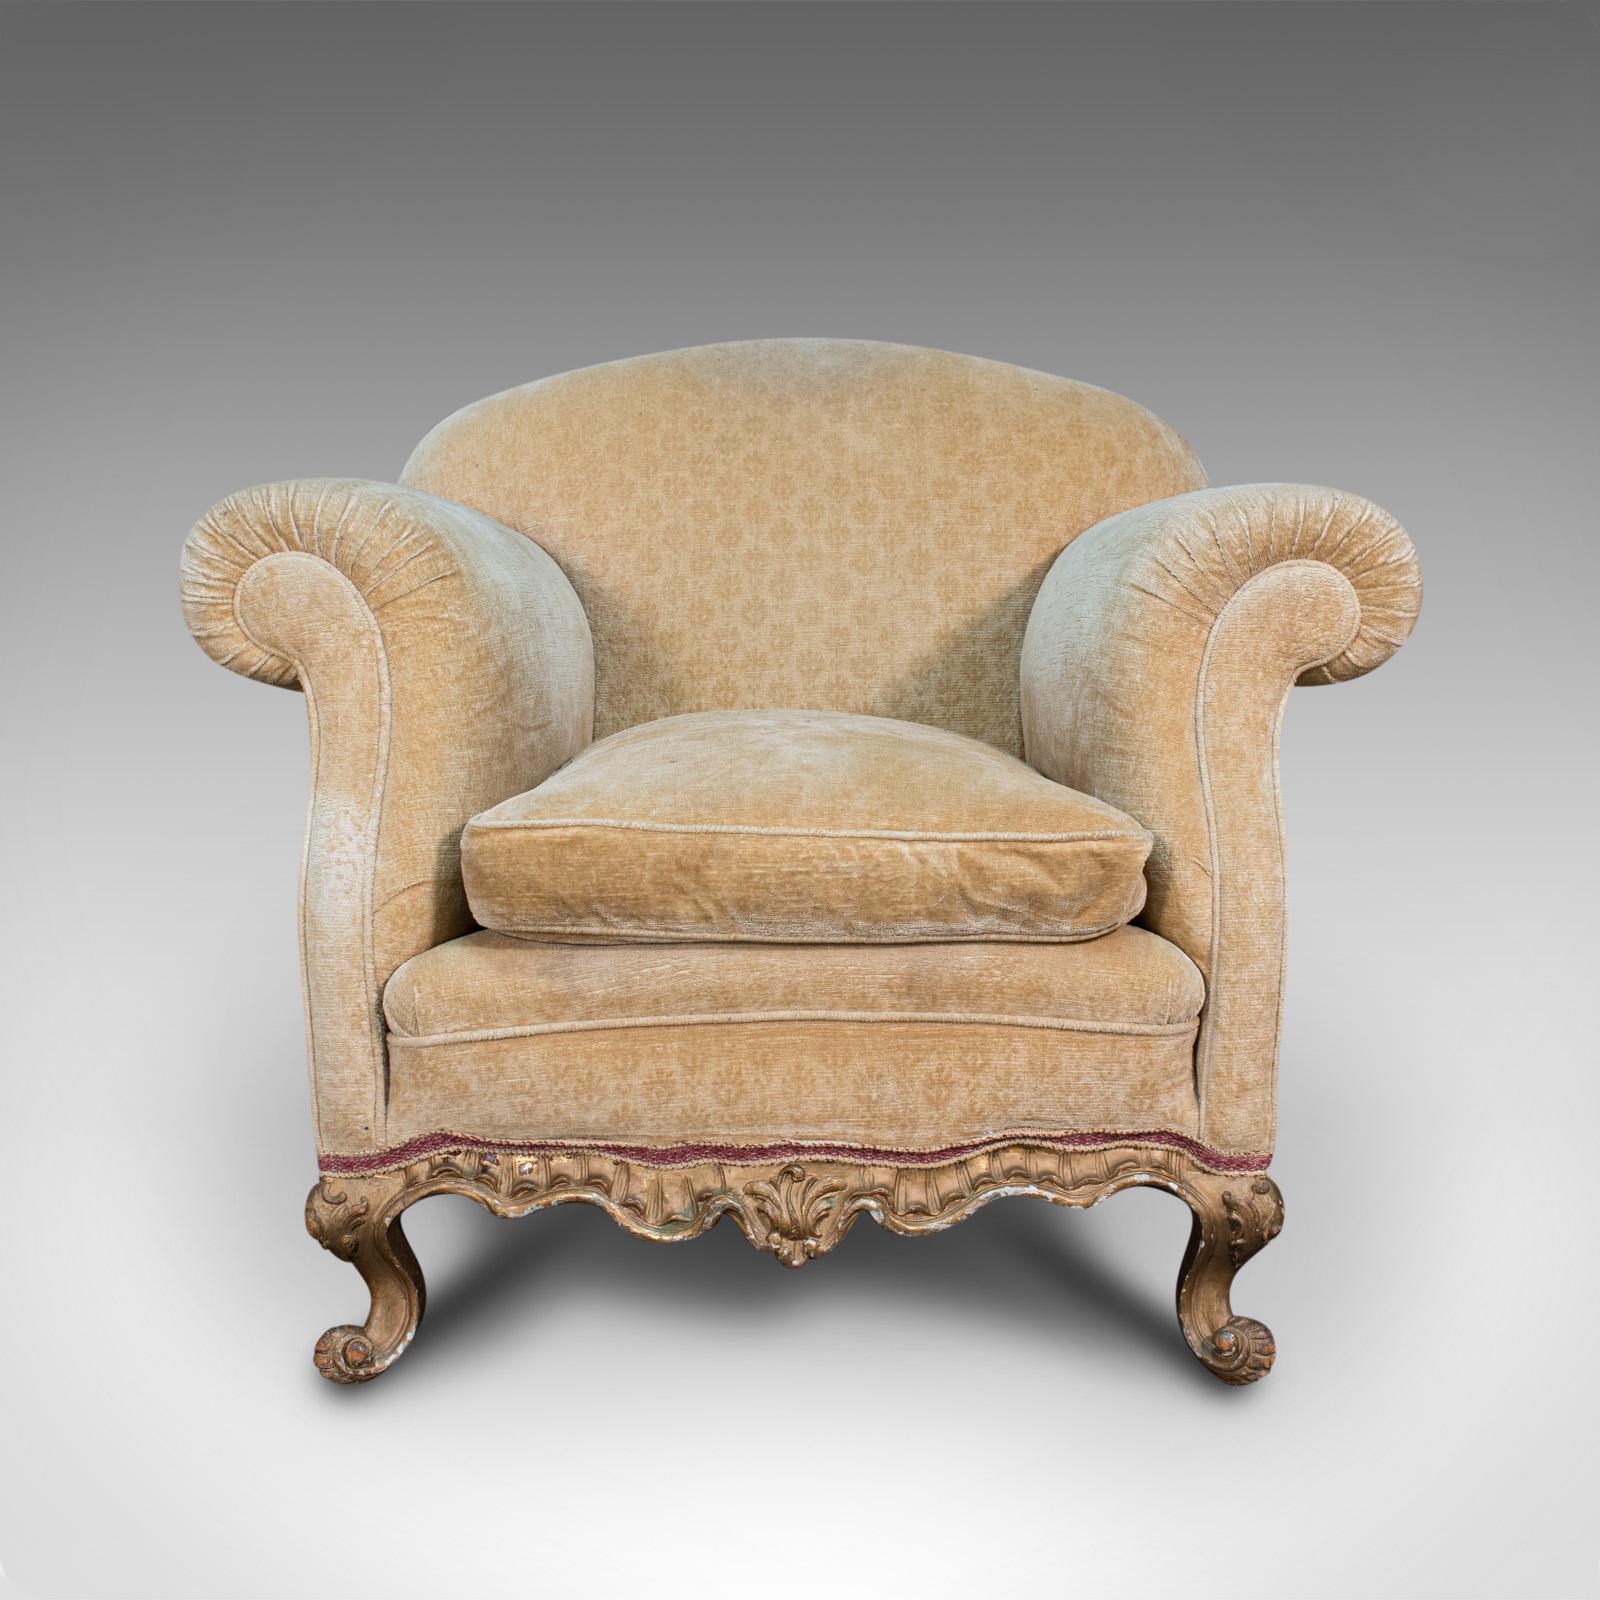 This is an antique armchair. A French, upholstered beech lounge or tub seat, dating to the late Victorian period, circa 1900.

Lasting French elegance for the relaxed living room
Displays a desirable aged patina - can be enjoyed as is or